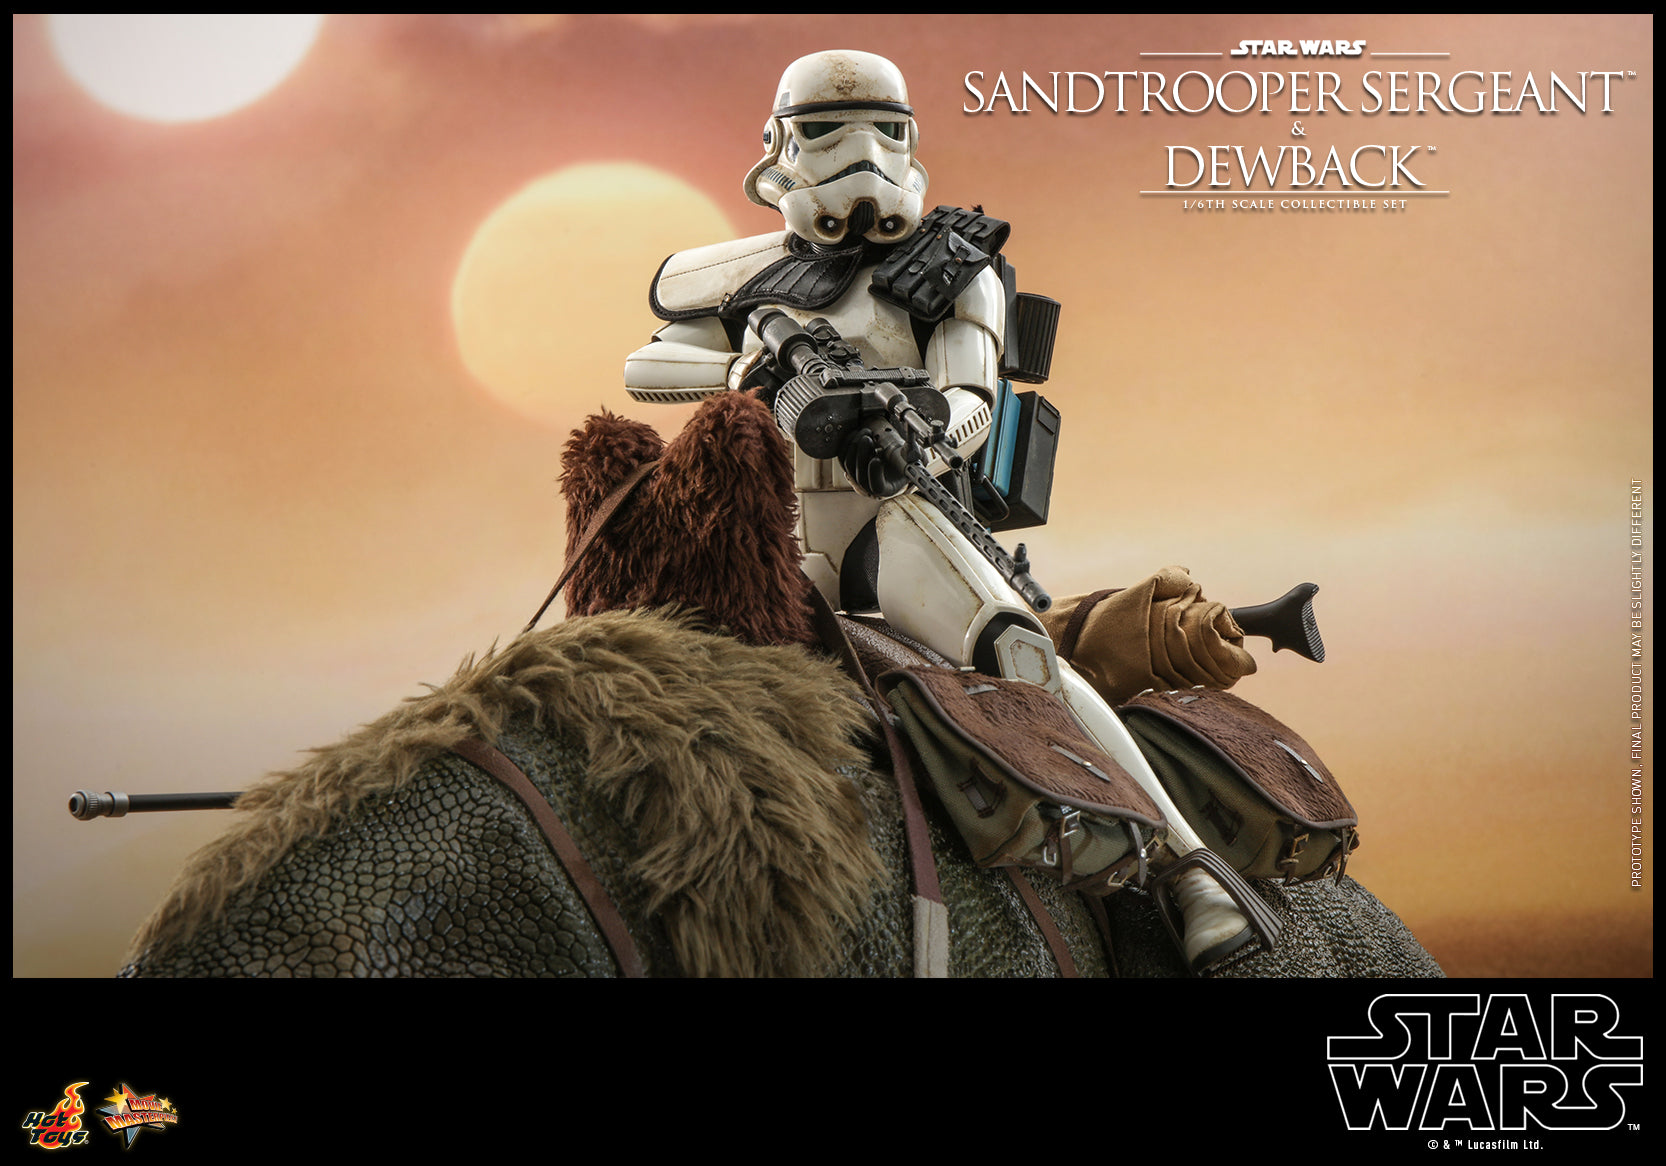 Hot Toys - MMS722 - Star Wars: A New Hope - Sandtrooper Sergeant and Dewback